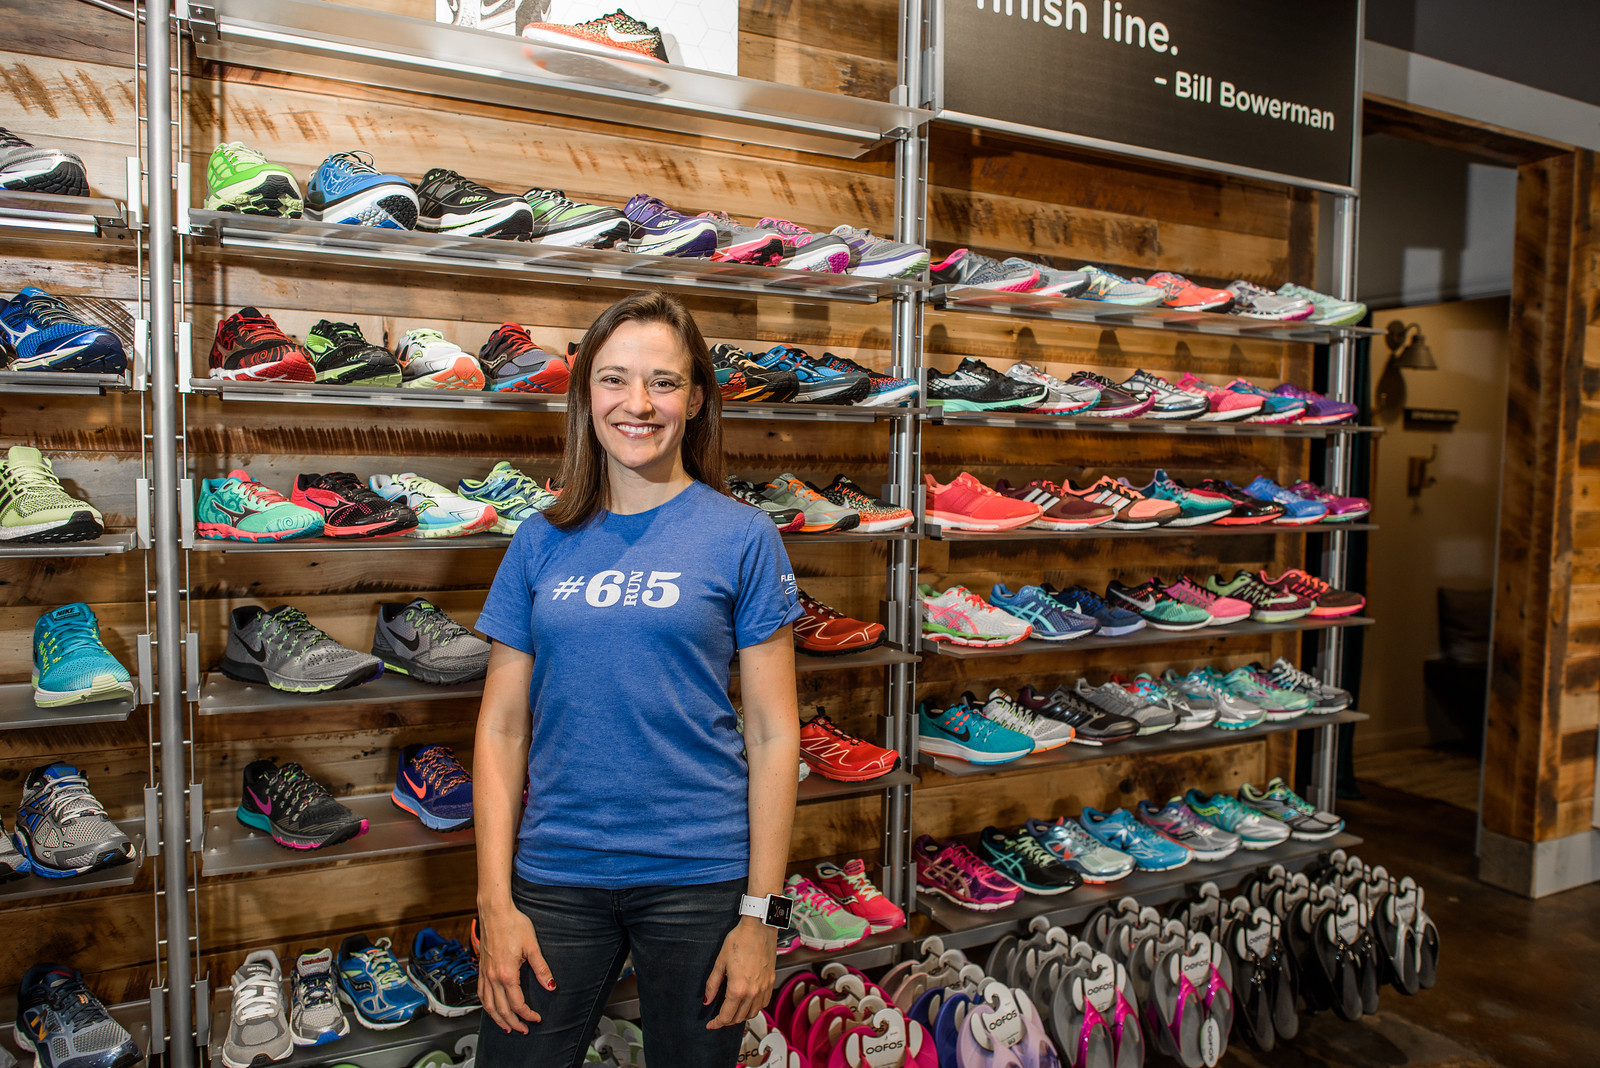 Alumna Trades Racing Up Corporate Ladder For ‘fleet Feet On The Ground